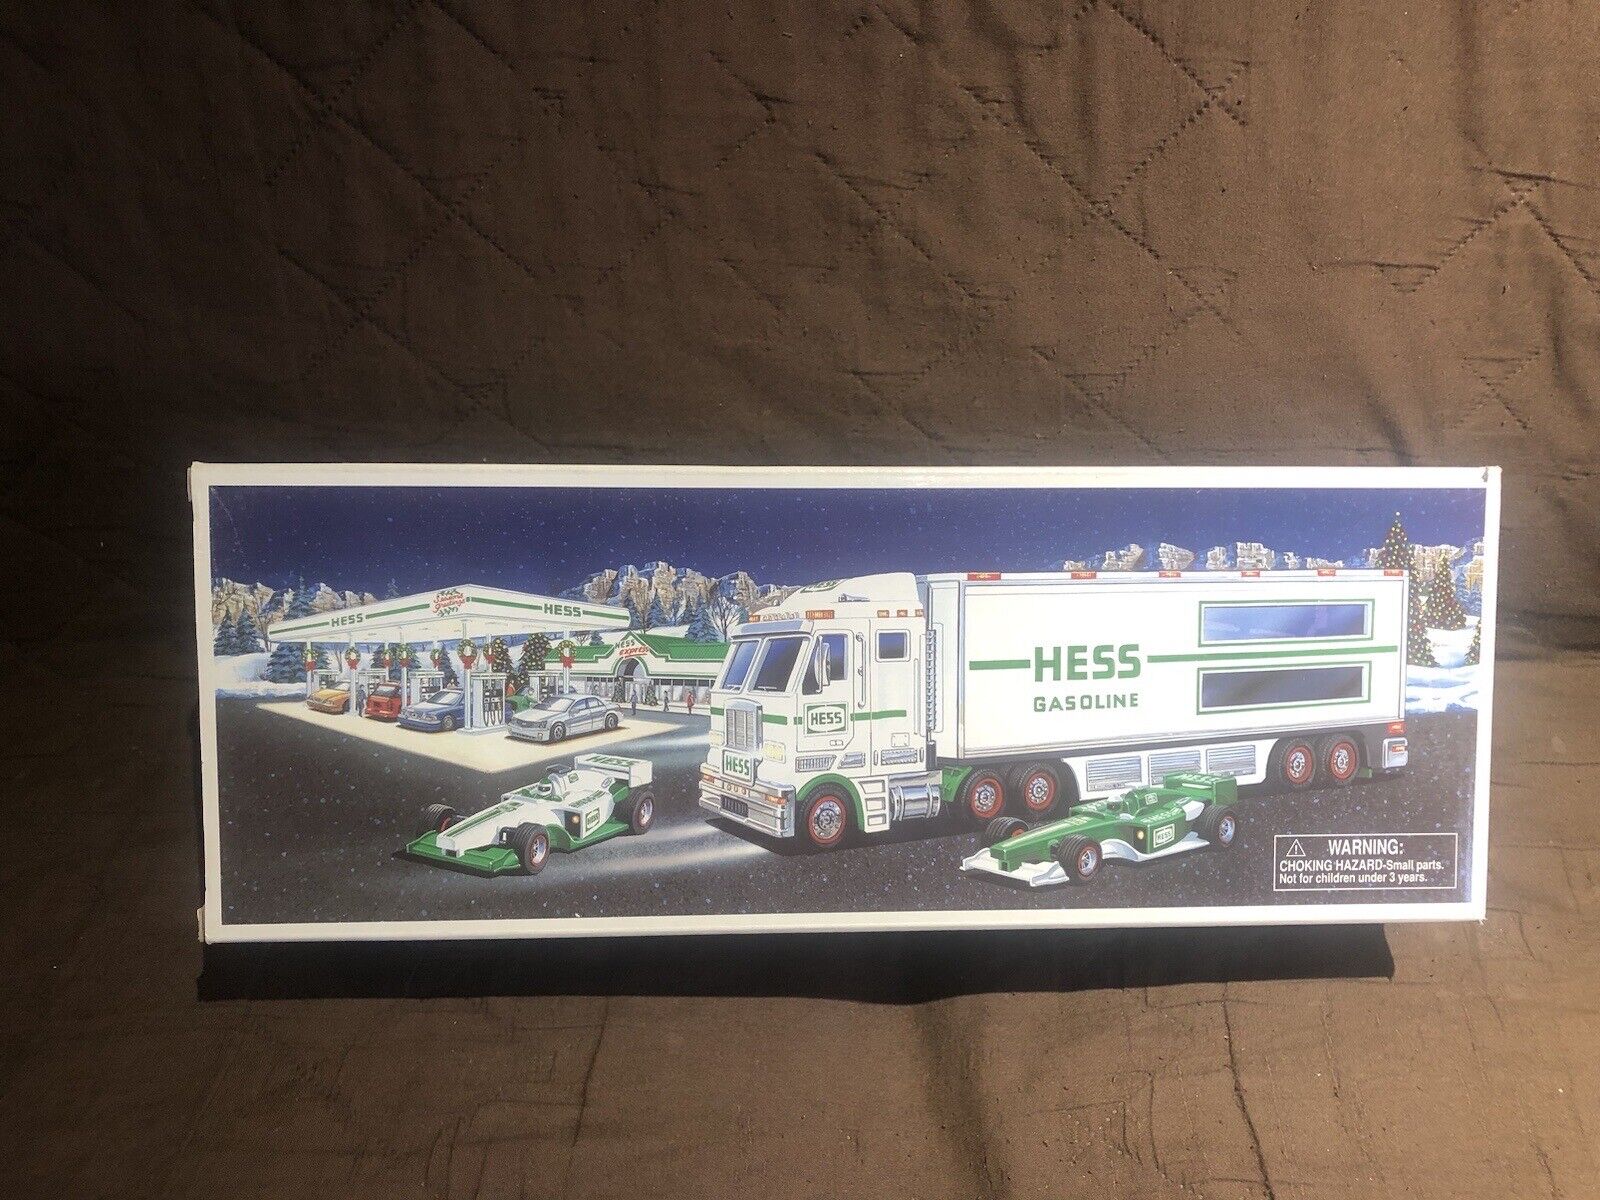 BRAND NEW 2003 HESS TOY TRUCK AND RACE CARS + 3 FREE ASSORTED HESS BAGS FREESHIP